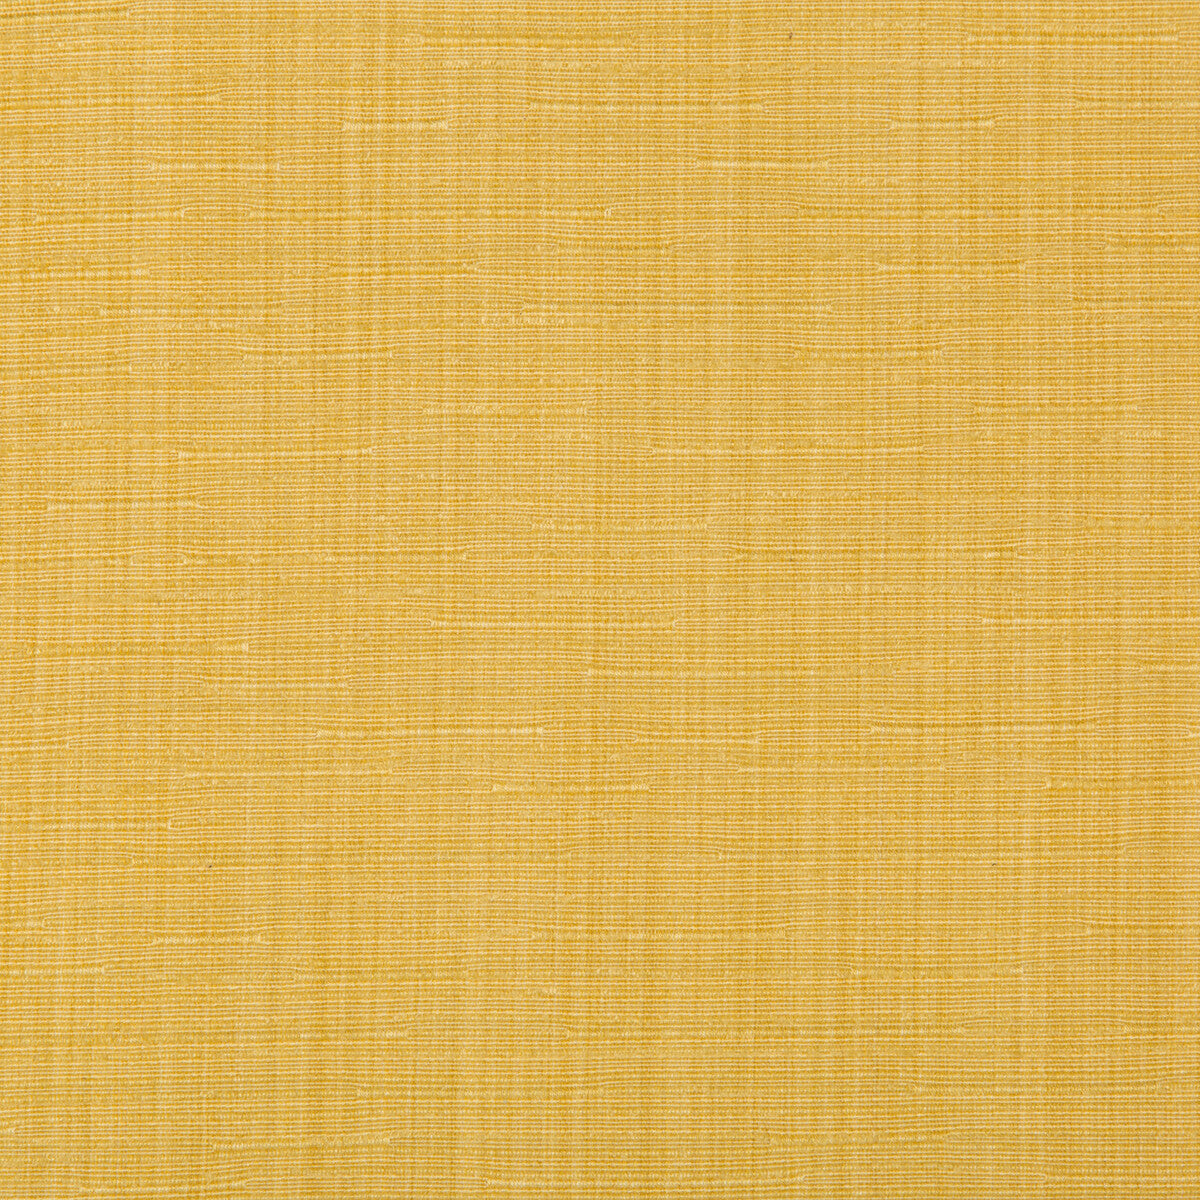 Somerset Strie fabric in maize color - pattern 2018150.40.0 - by Lee Jofa in the Somerset Strie collection